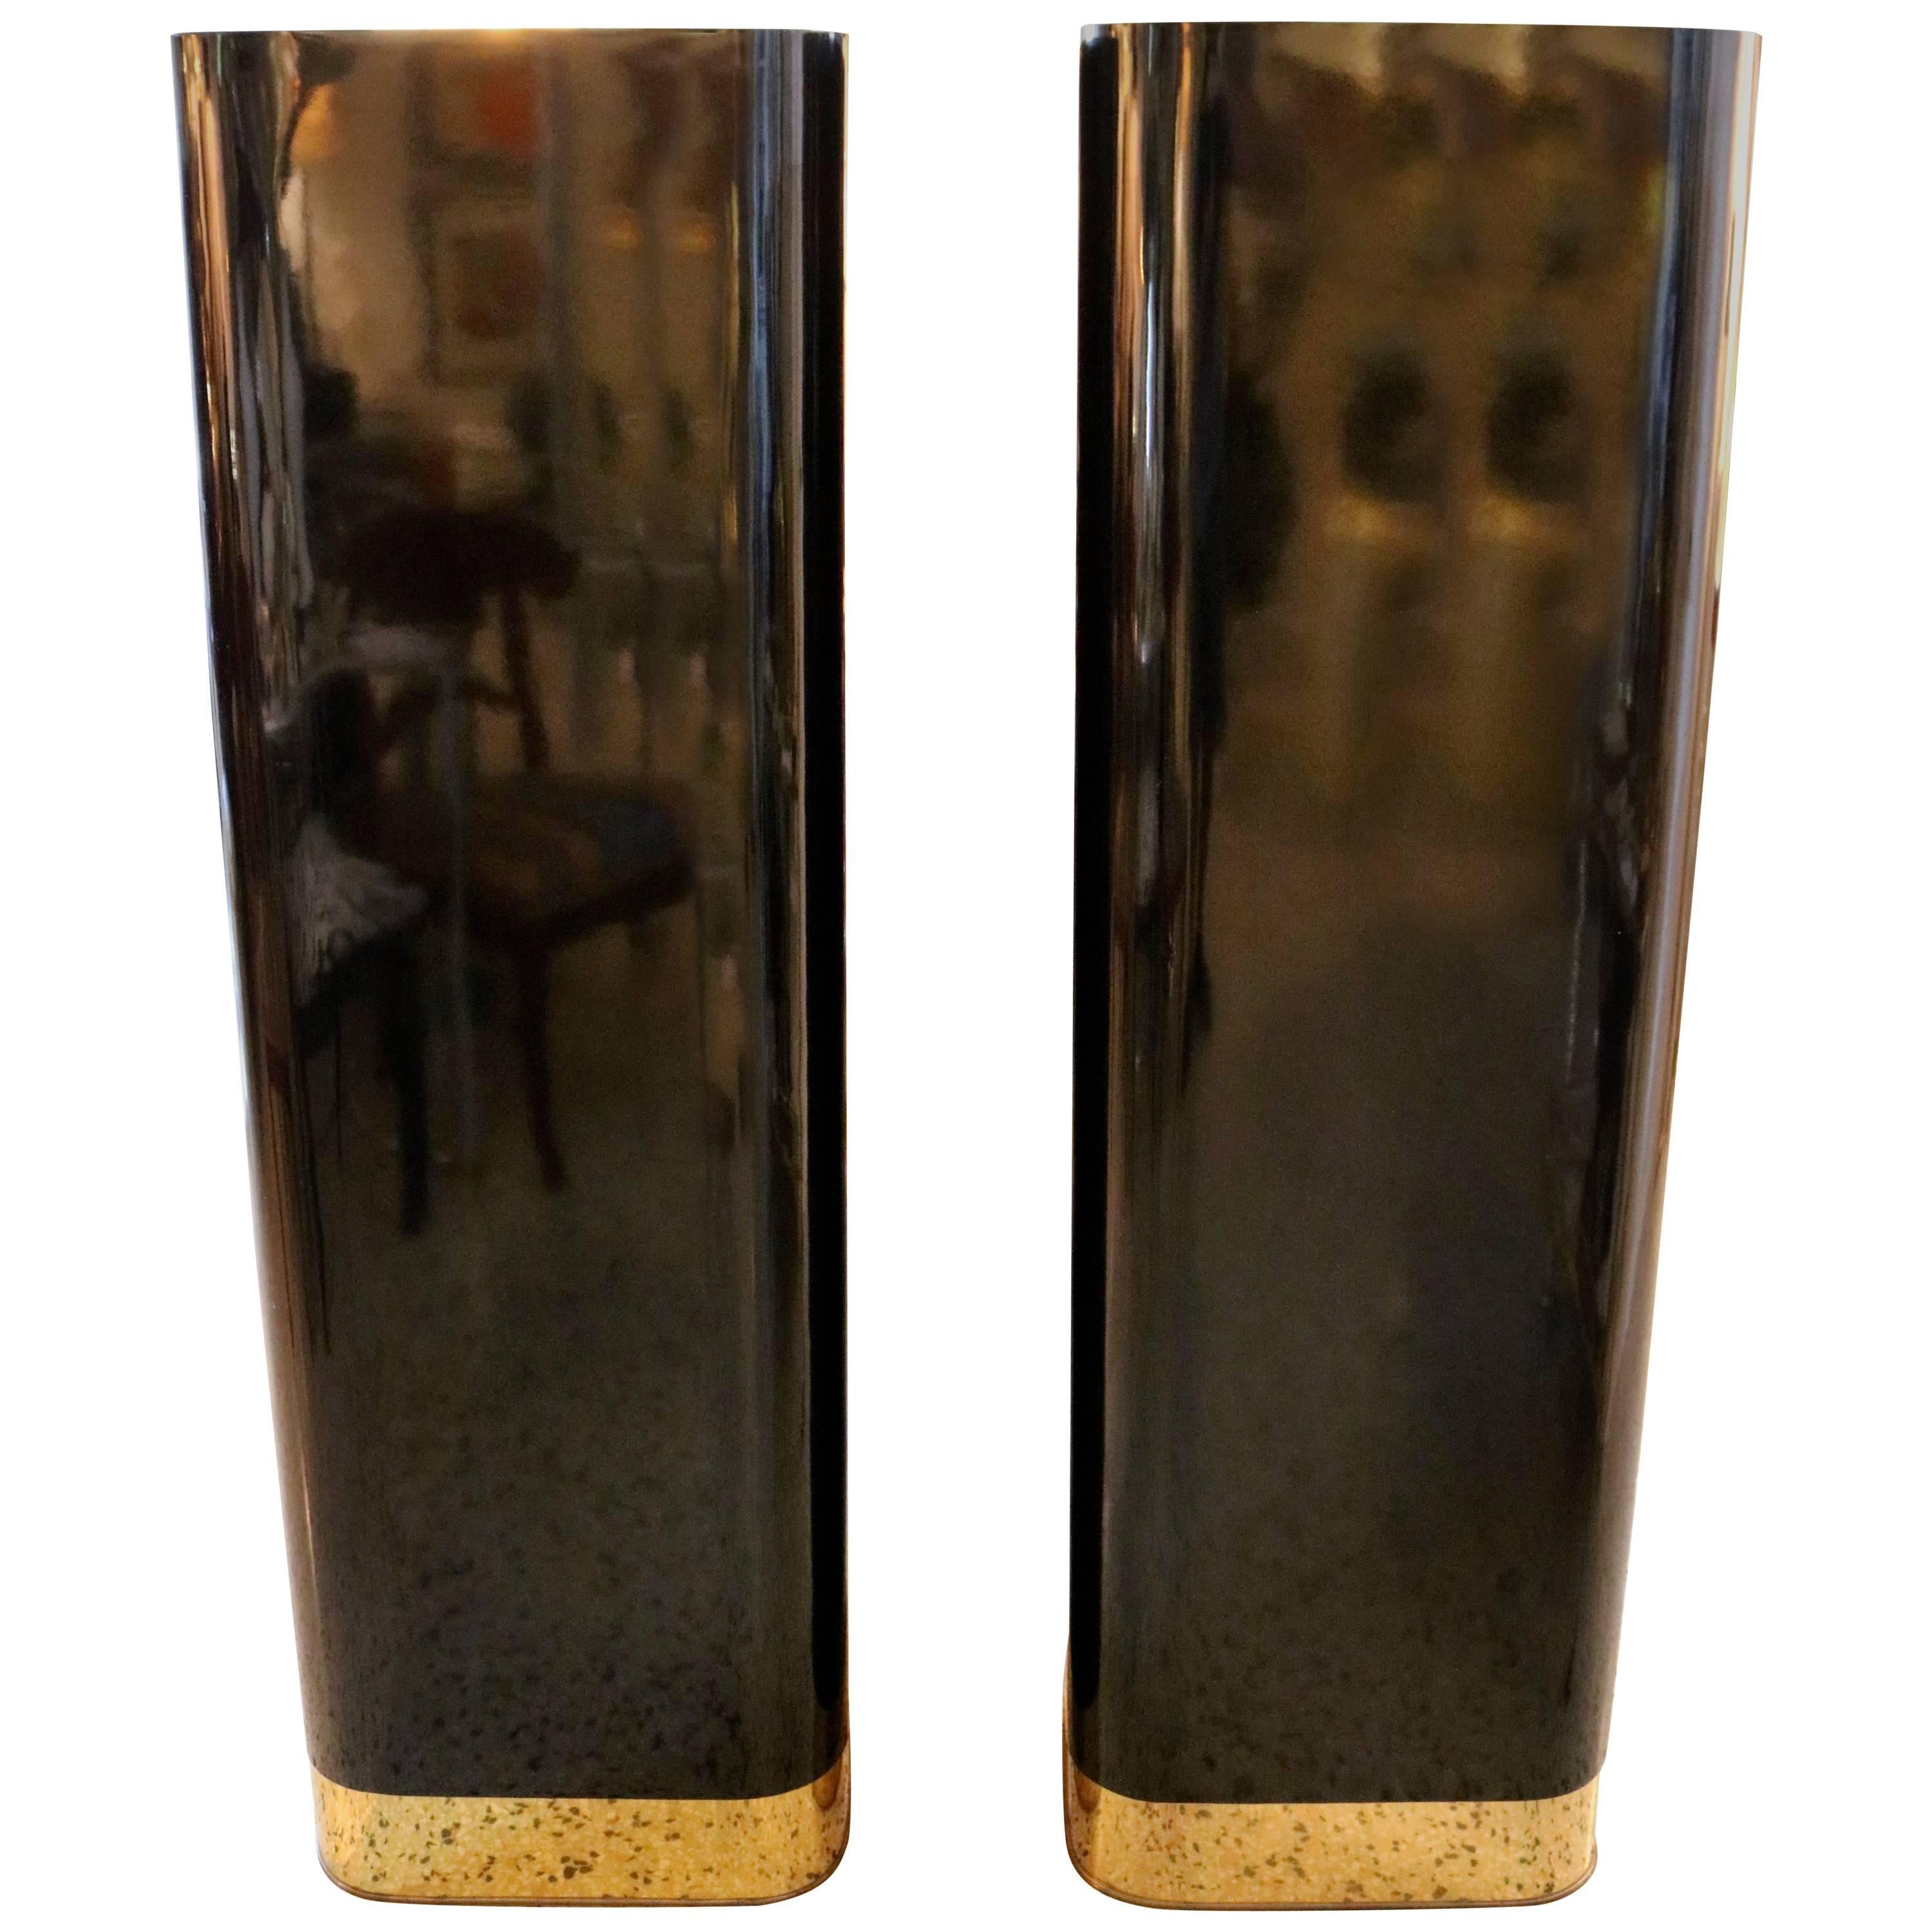 Pair of  Pedestals in Black Laminate and Polished Brass Trim